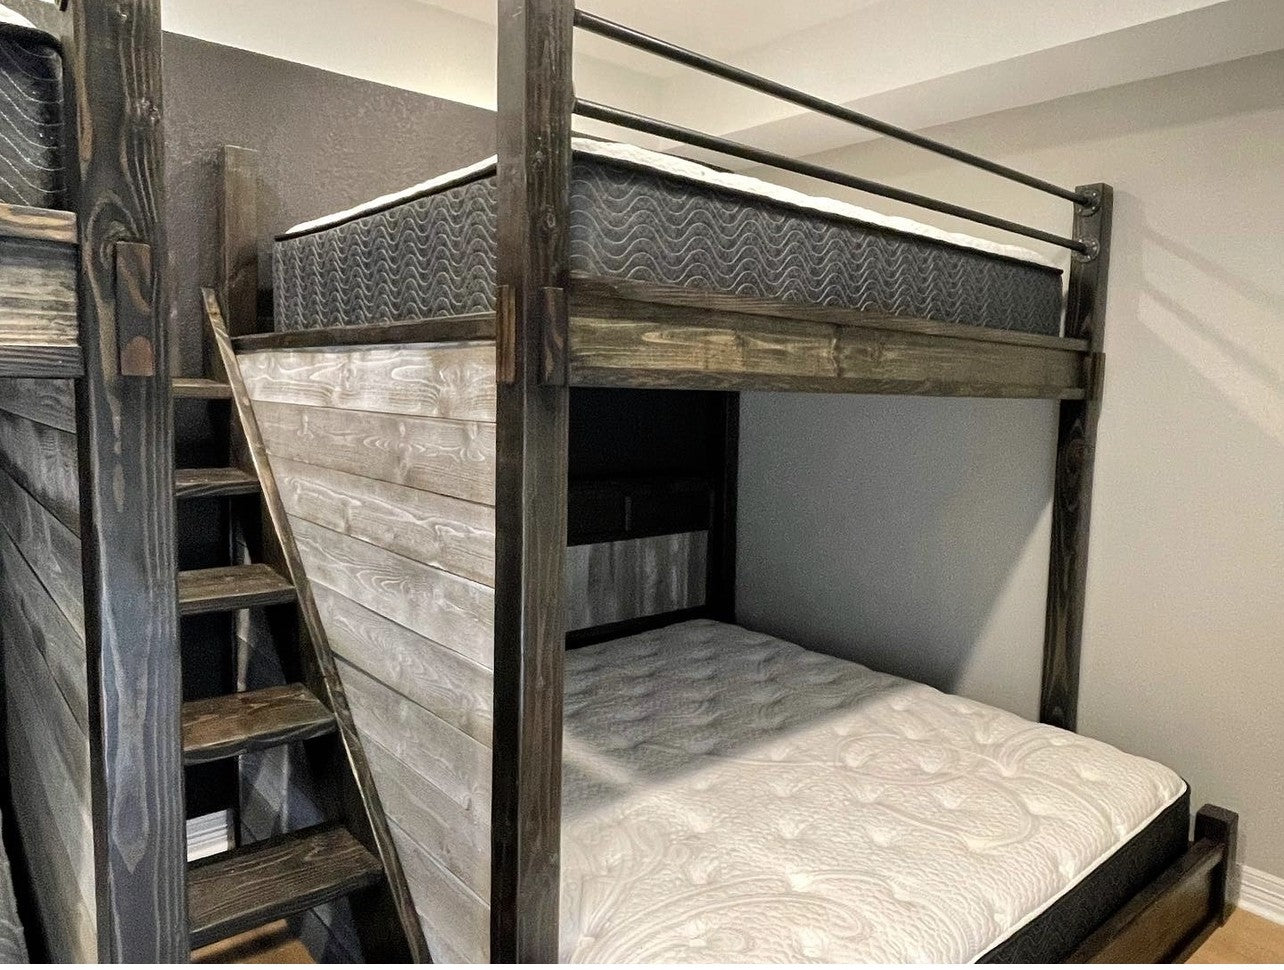 Lake Granbury Single Bunk Bed : Customizable Bunk Bed for Adults